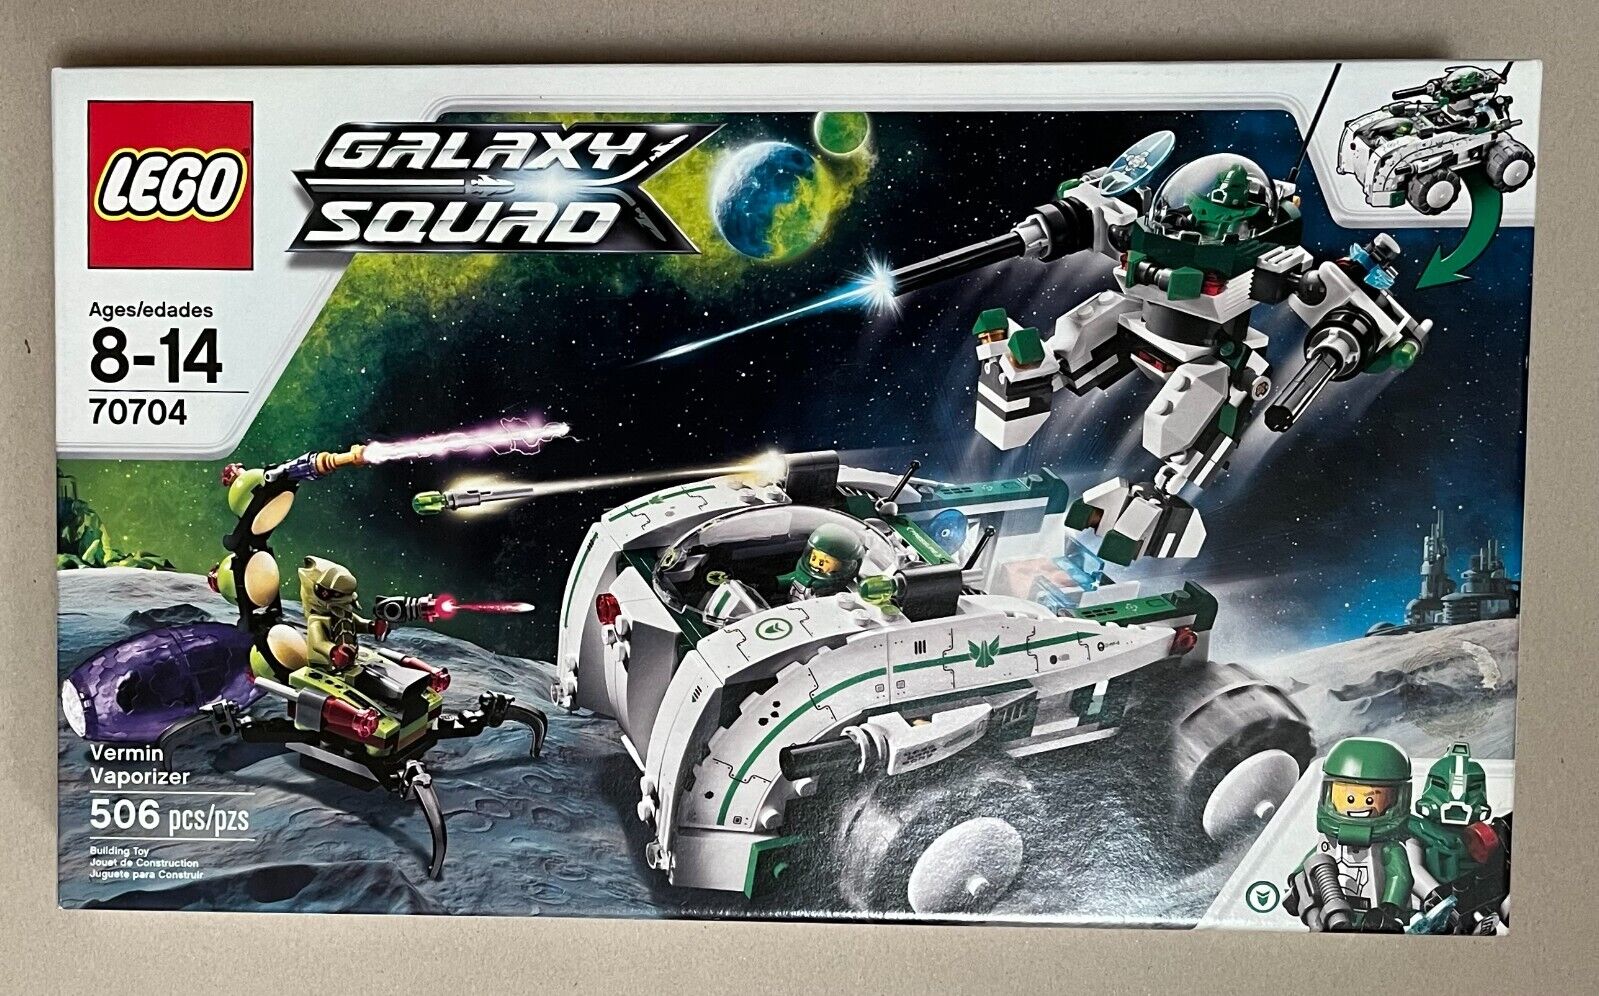 NEW Lego 70704 Galaxy Squad Vermin Vaporizer -Factory Sealed- RETIRED